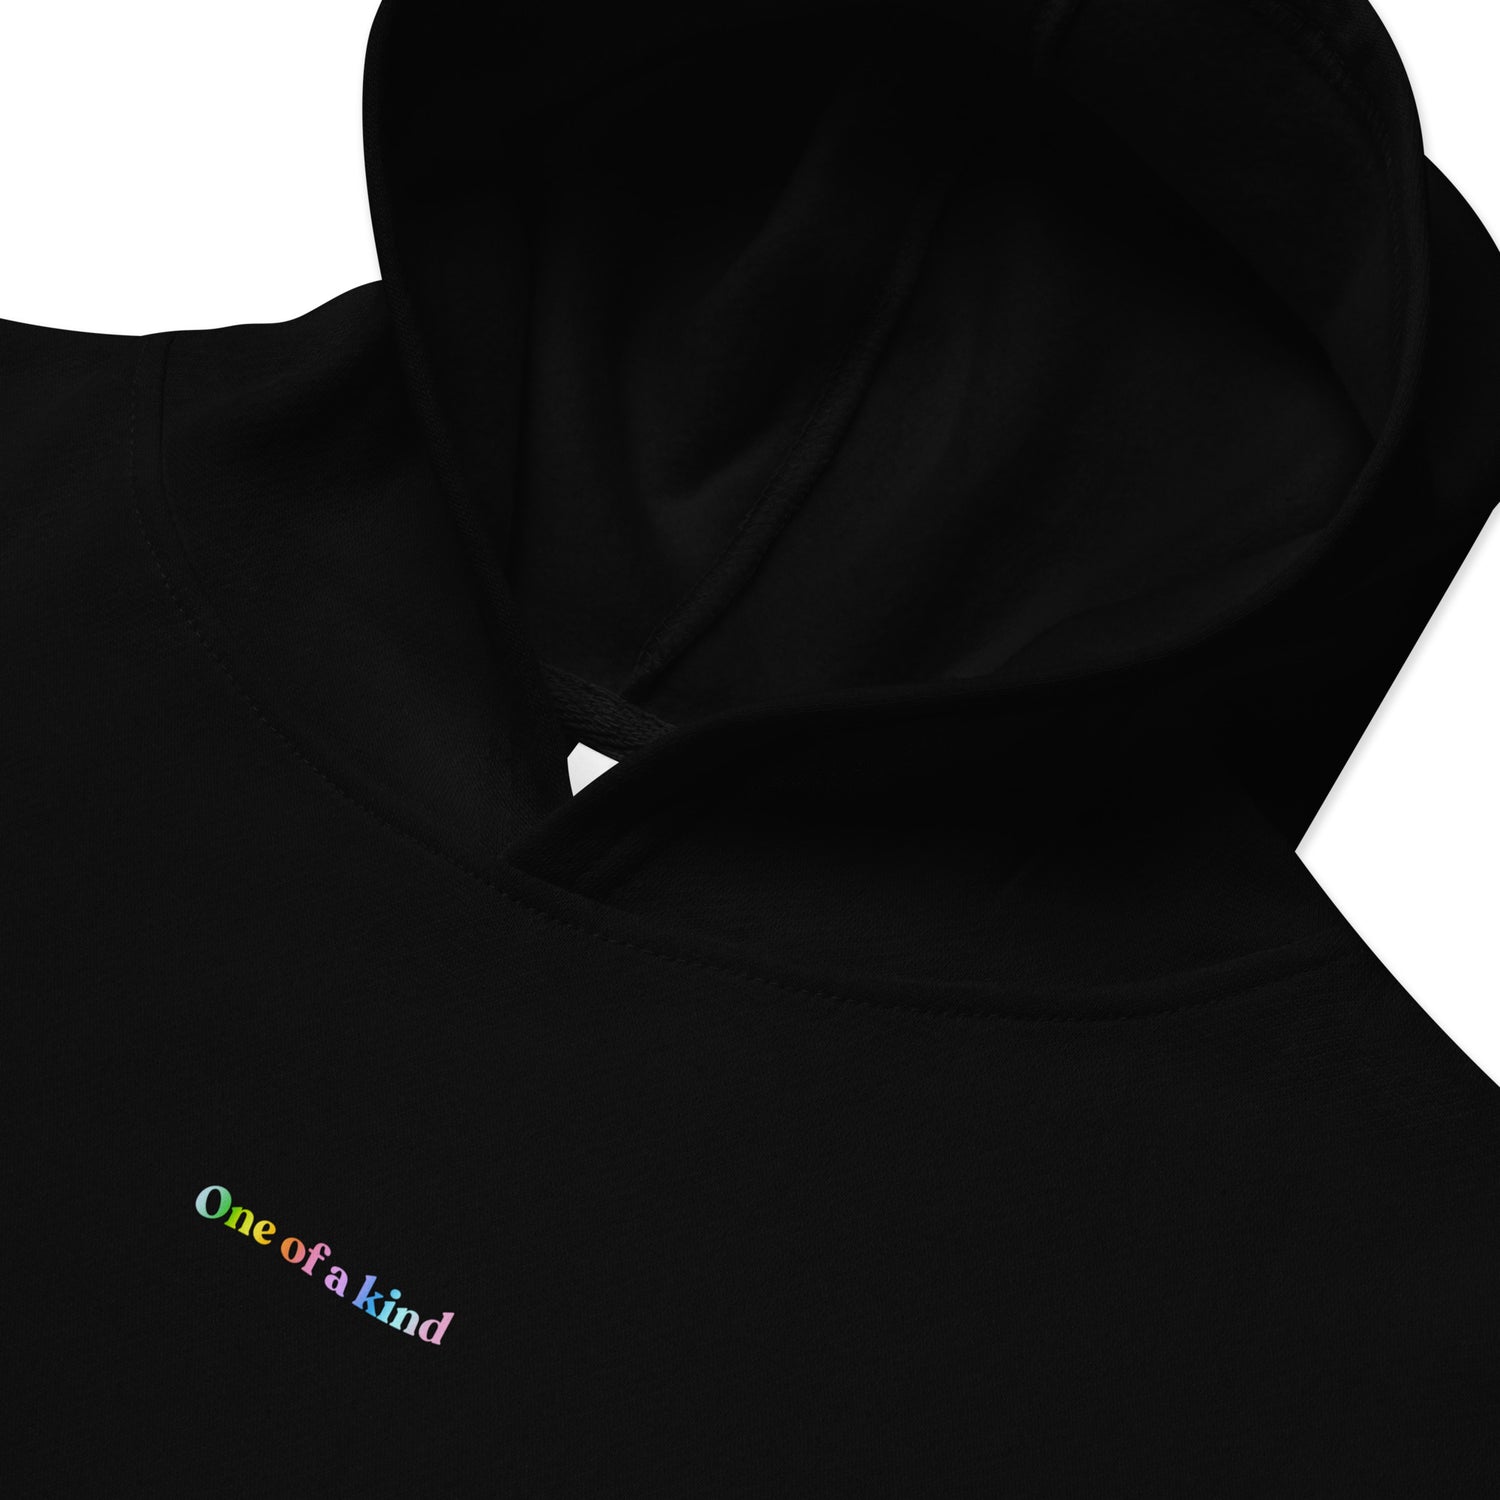 Closeup of Black Kidswear Hoodie featuring "One of a kind" printed on front.